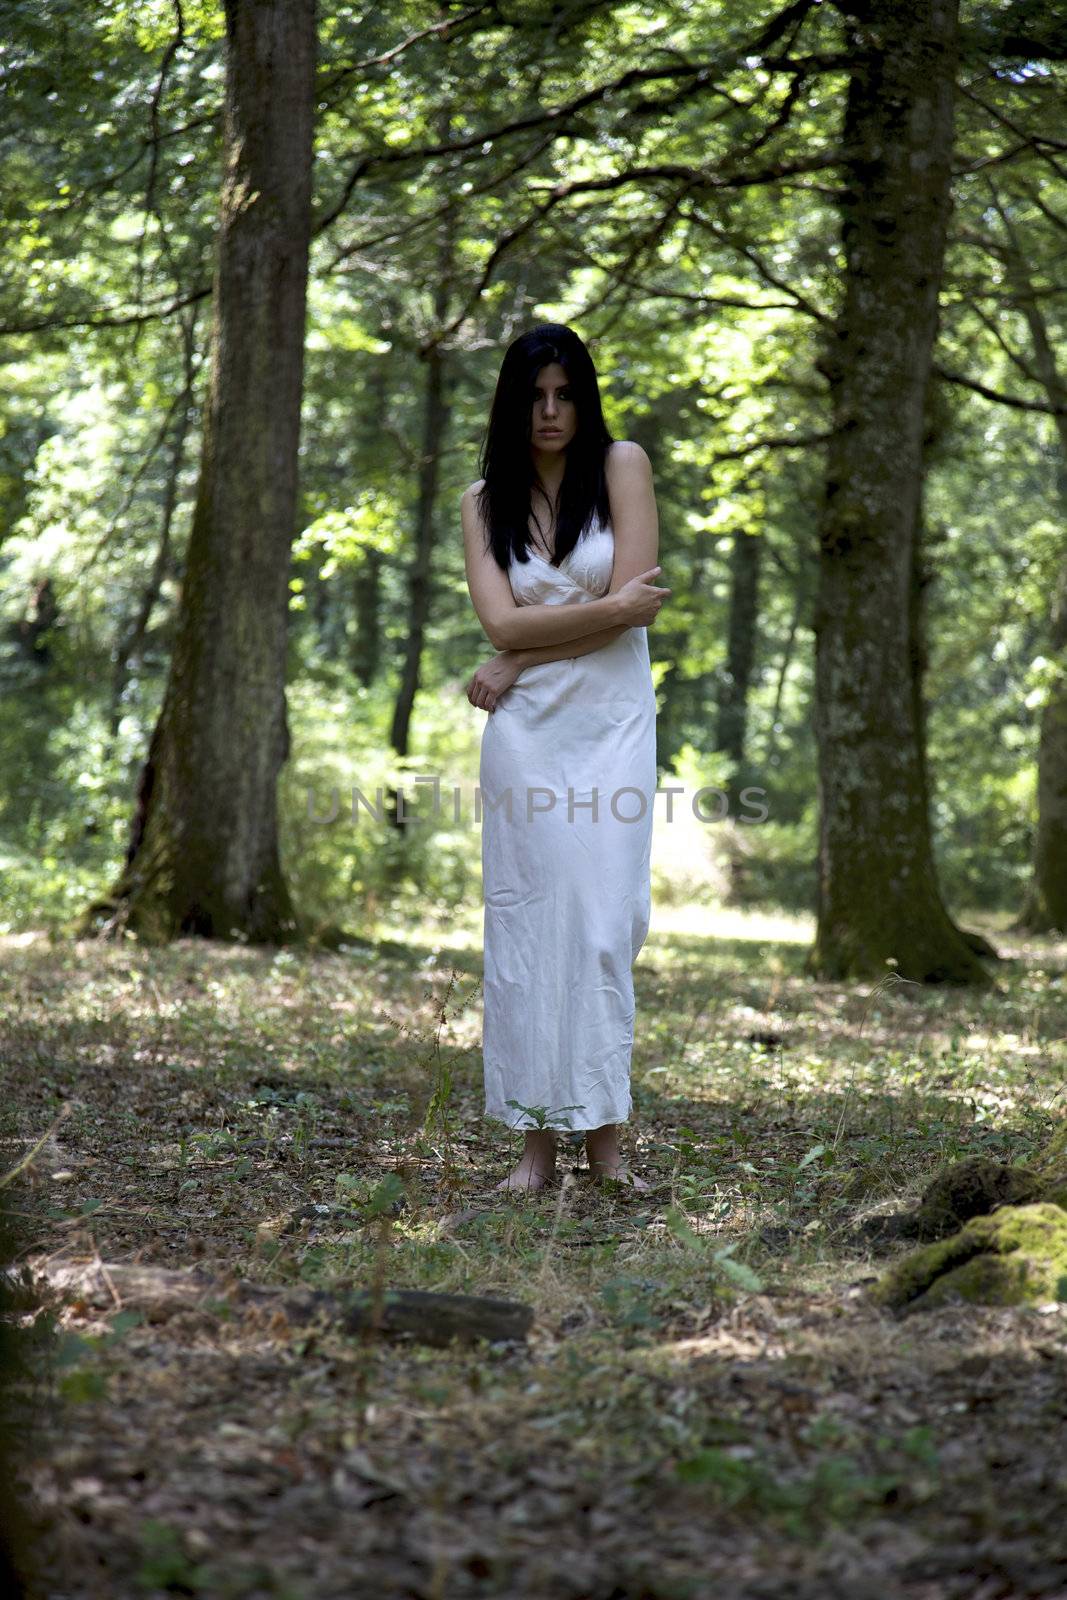 Fashion model with lingerie lonely in a forest with trees